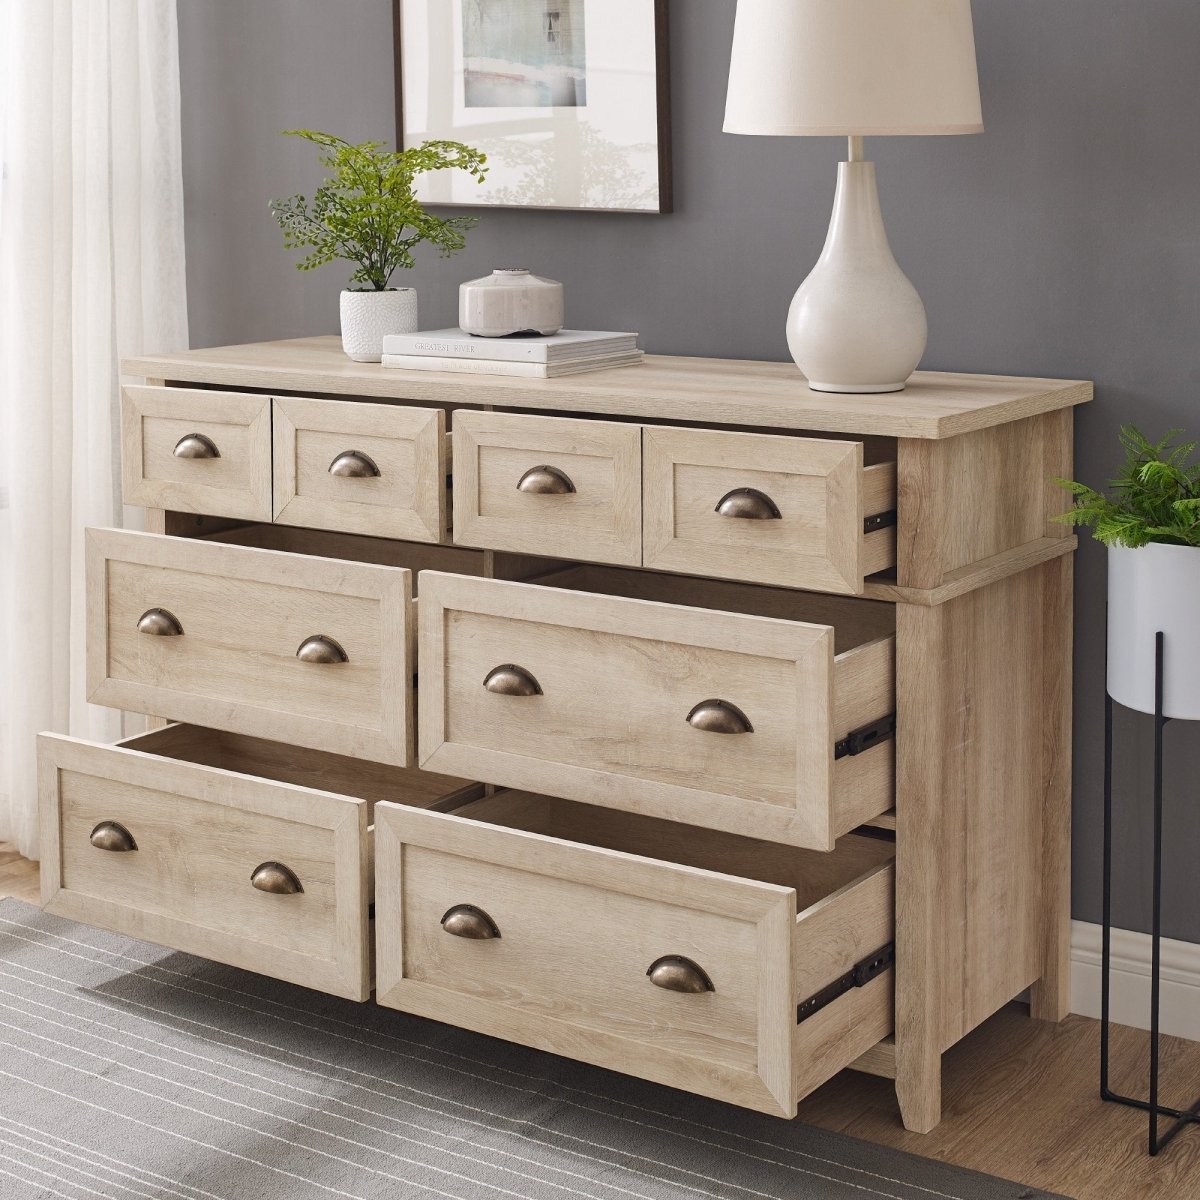 Walker Edison Odette Transitional Farmhouse Collection (Dresser or Nightstand) - lily & onyx